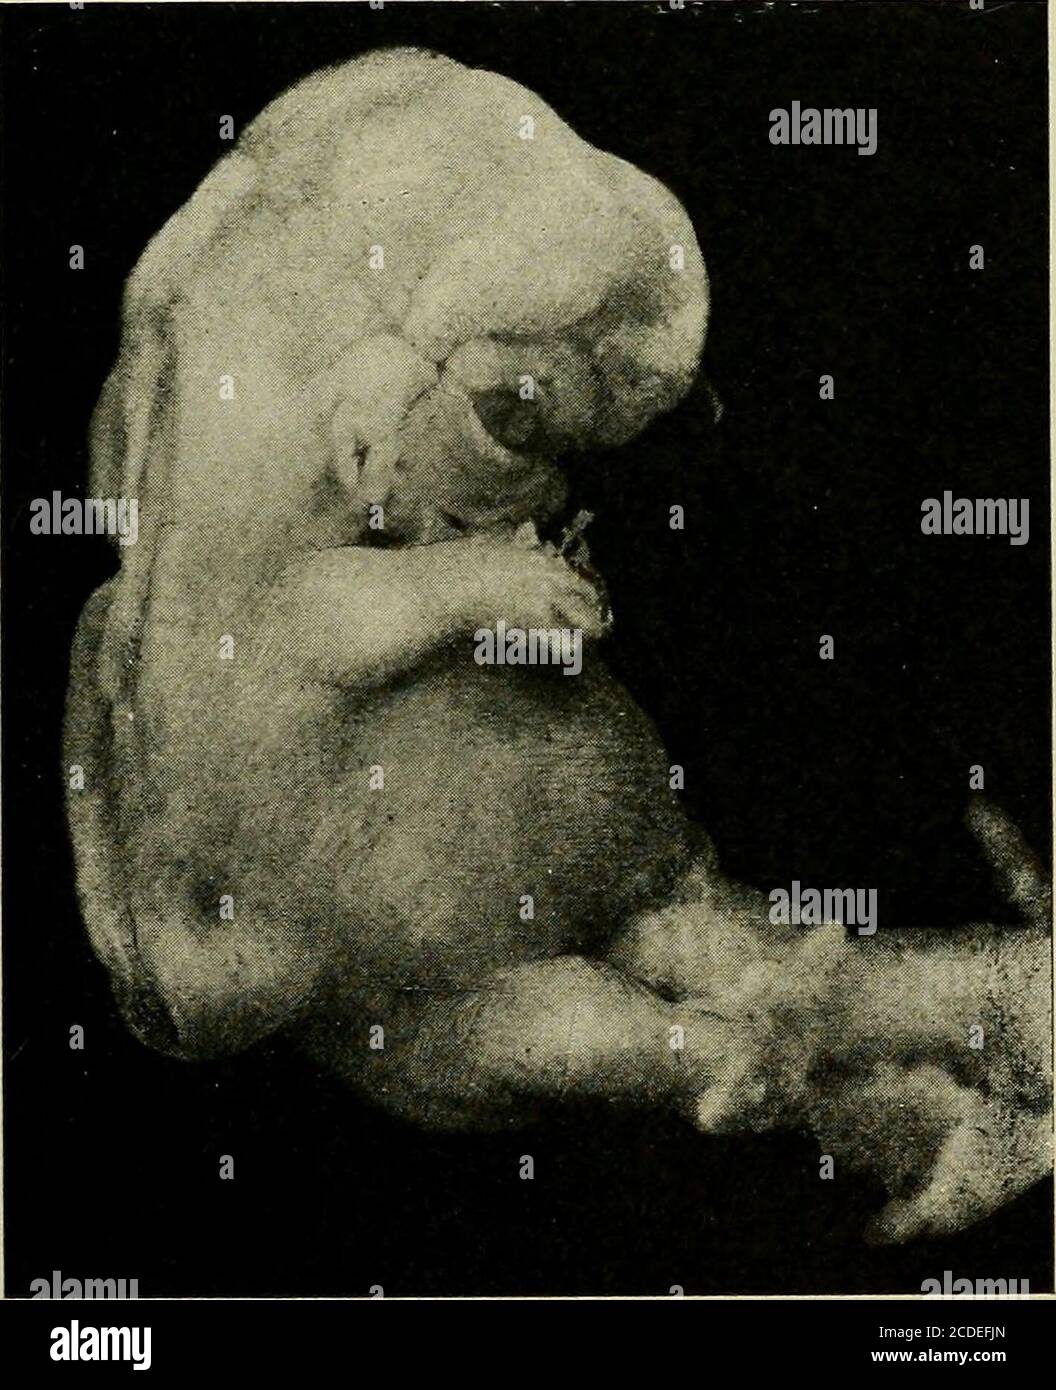 . A study of the causes underlying the origin of human monsters : third contribution to the study of the pathology of human embryos . Fig. 292a b.—Photograph of the embryo lying within the magma,times. X 7 No. i.] ORIGIN OF HUMAN MONSTERS. 285 most of the spinal cord have been destroyed; at one point thecord ramifies through the embryo. In the middle of the em-bryo the aortae and ccelom are sharply defined, but elsewherethe tissues are entirely obscured by numerous round cells. Theepidermis is intact. No. 293. Embryo, C. R., 19 mm. Dr. Lamb, Washington. Dr. Lamb writes: Yesterday I sent you an Stock Photo